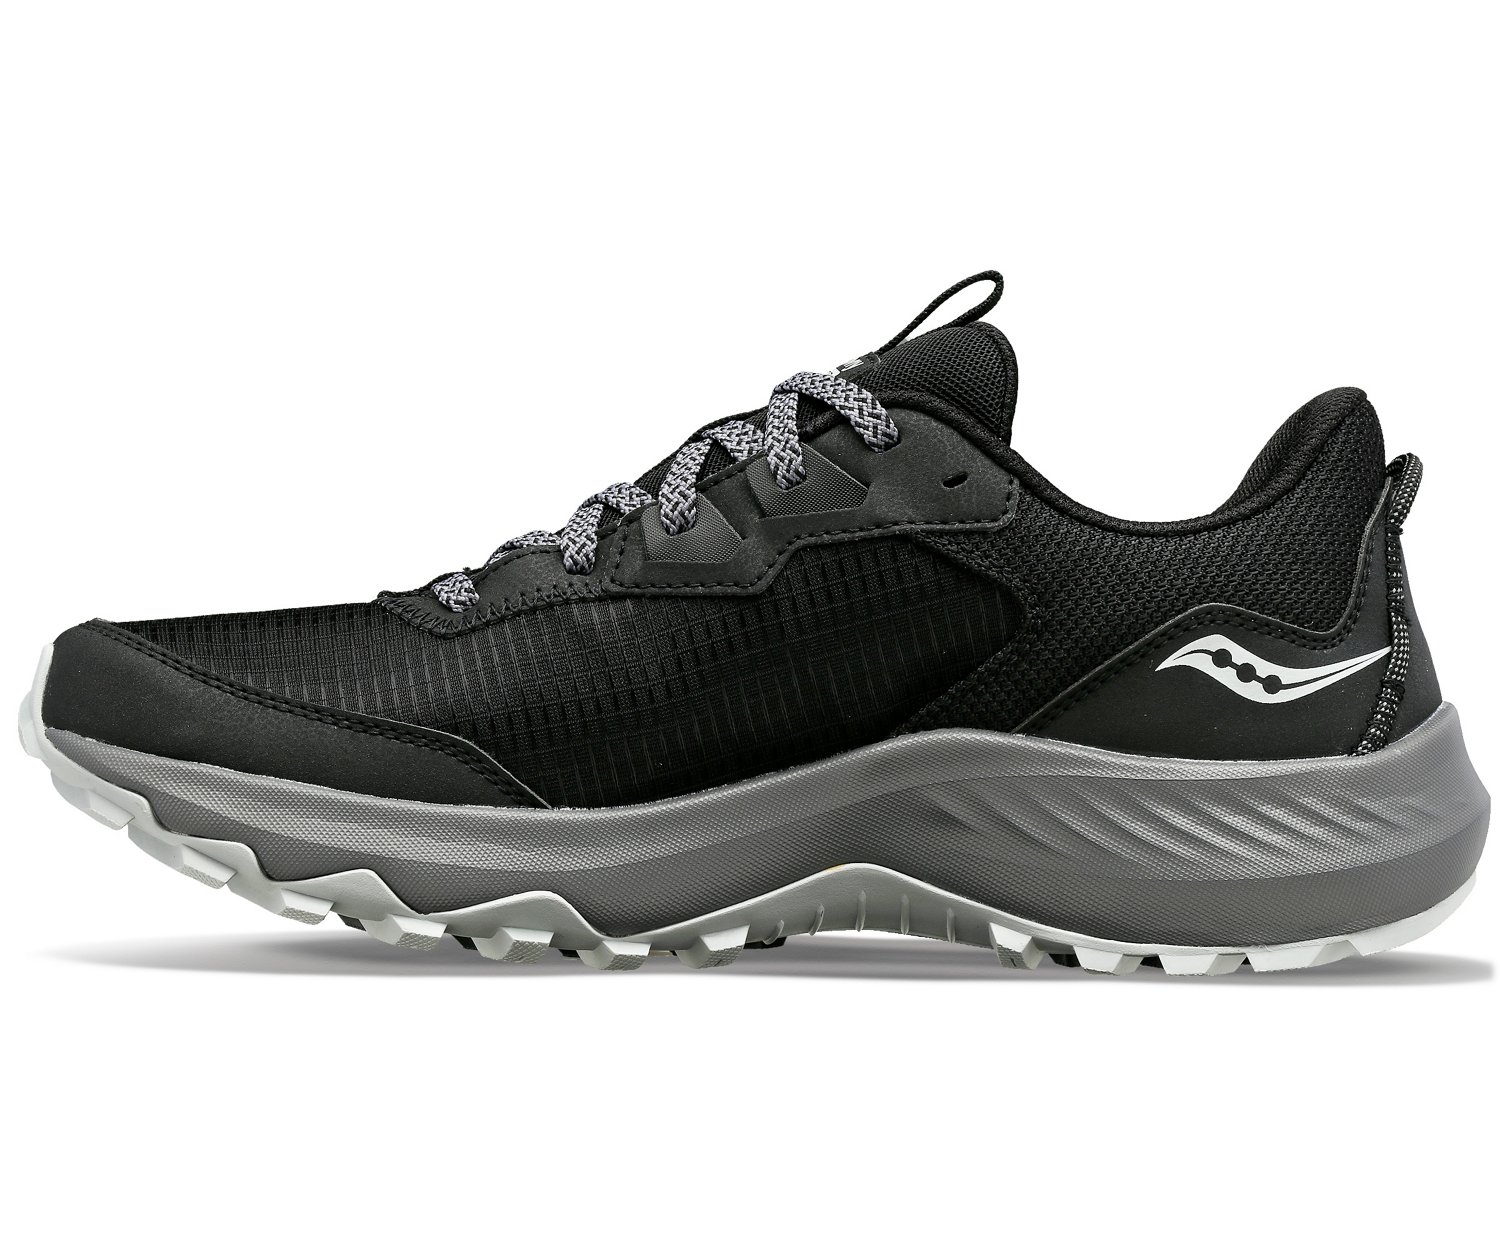 Men's Aura TR Shoes | Free Shipping at Academy